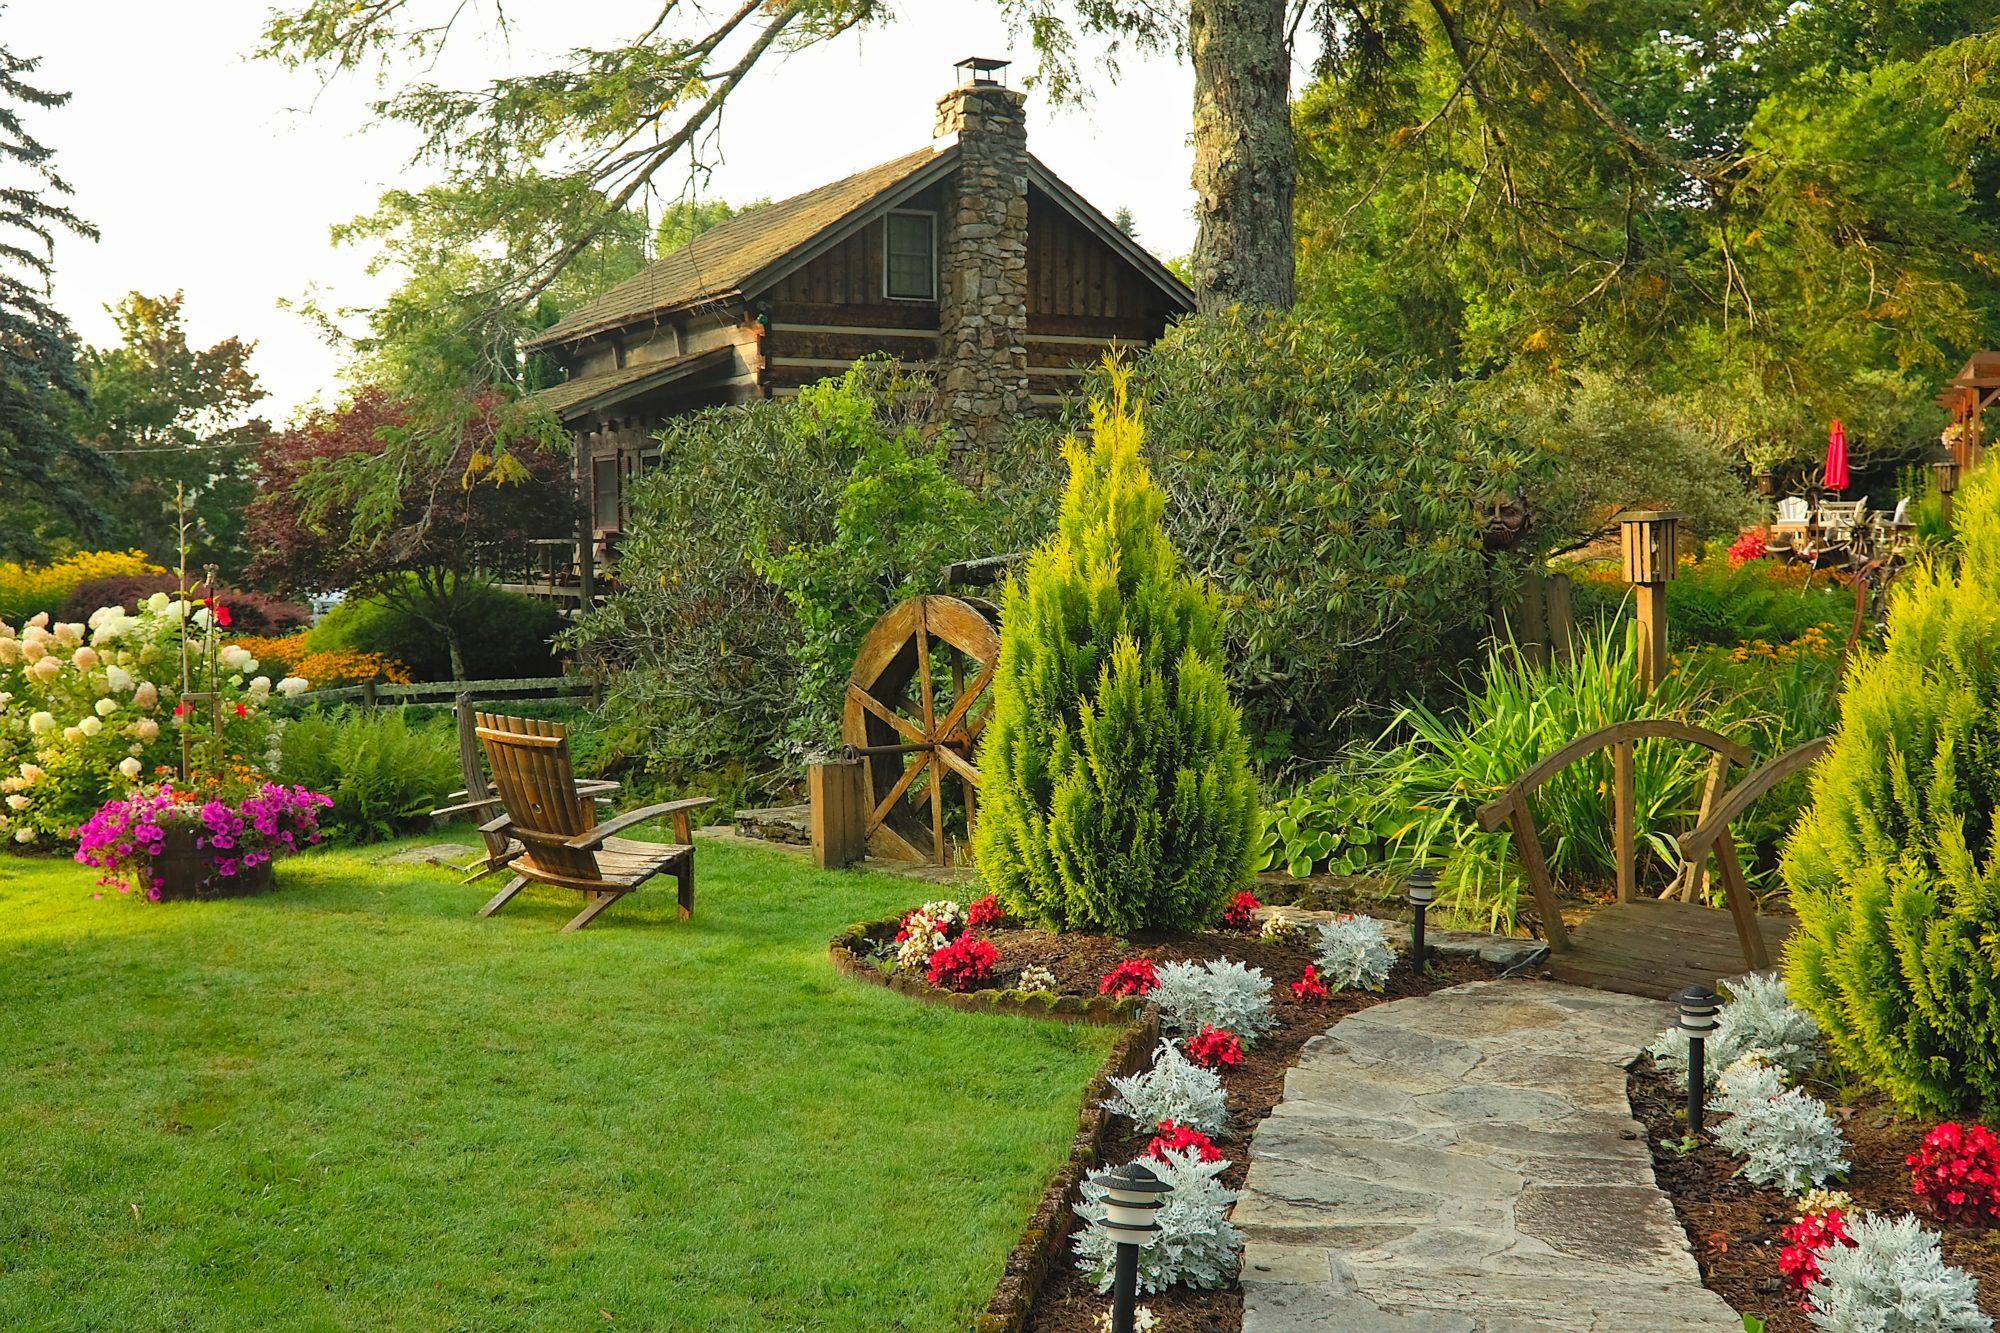 View of the log cabin from a distance, with a water wheel, flowers, and chairs in the foreground